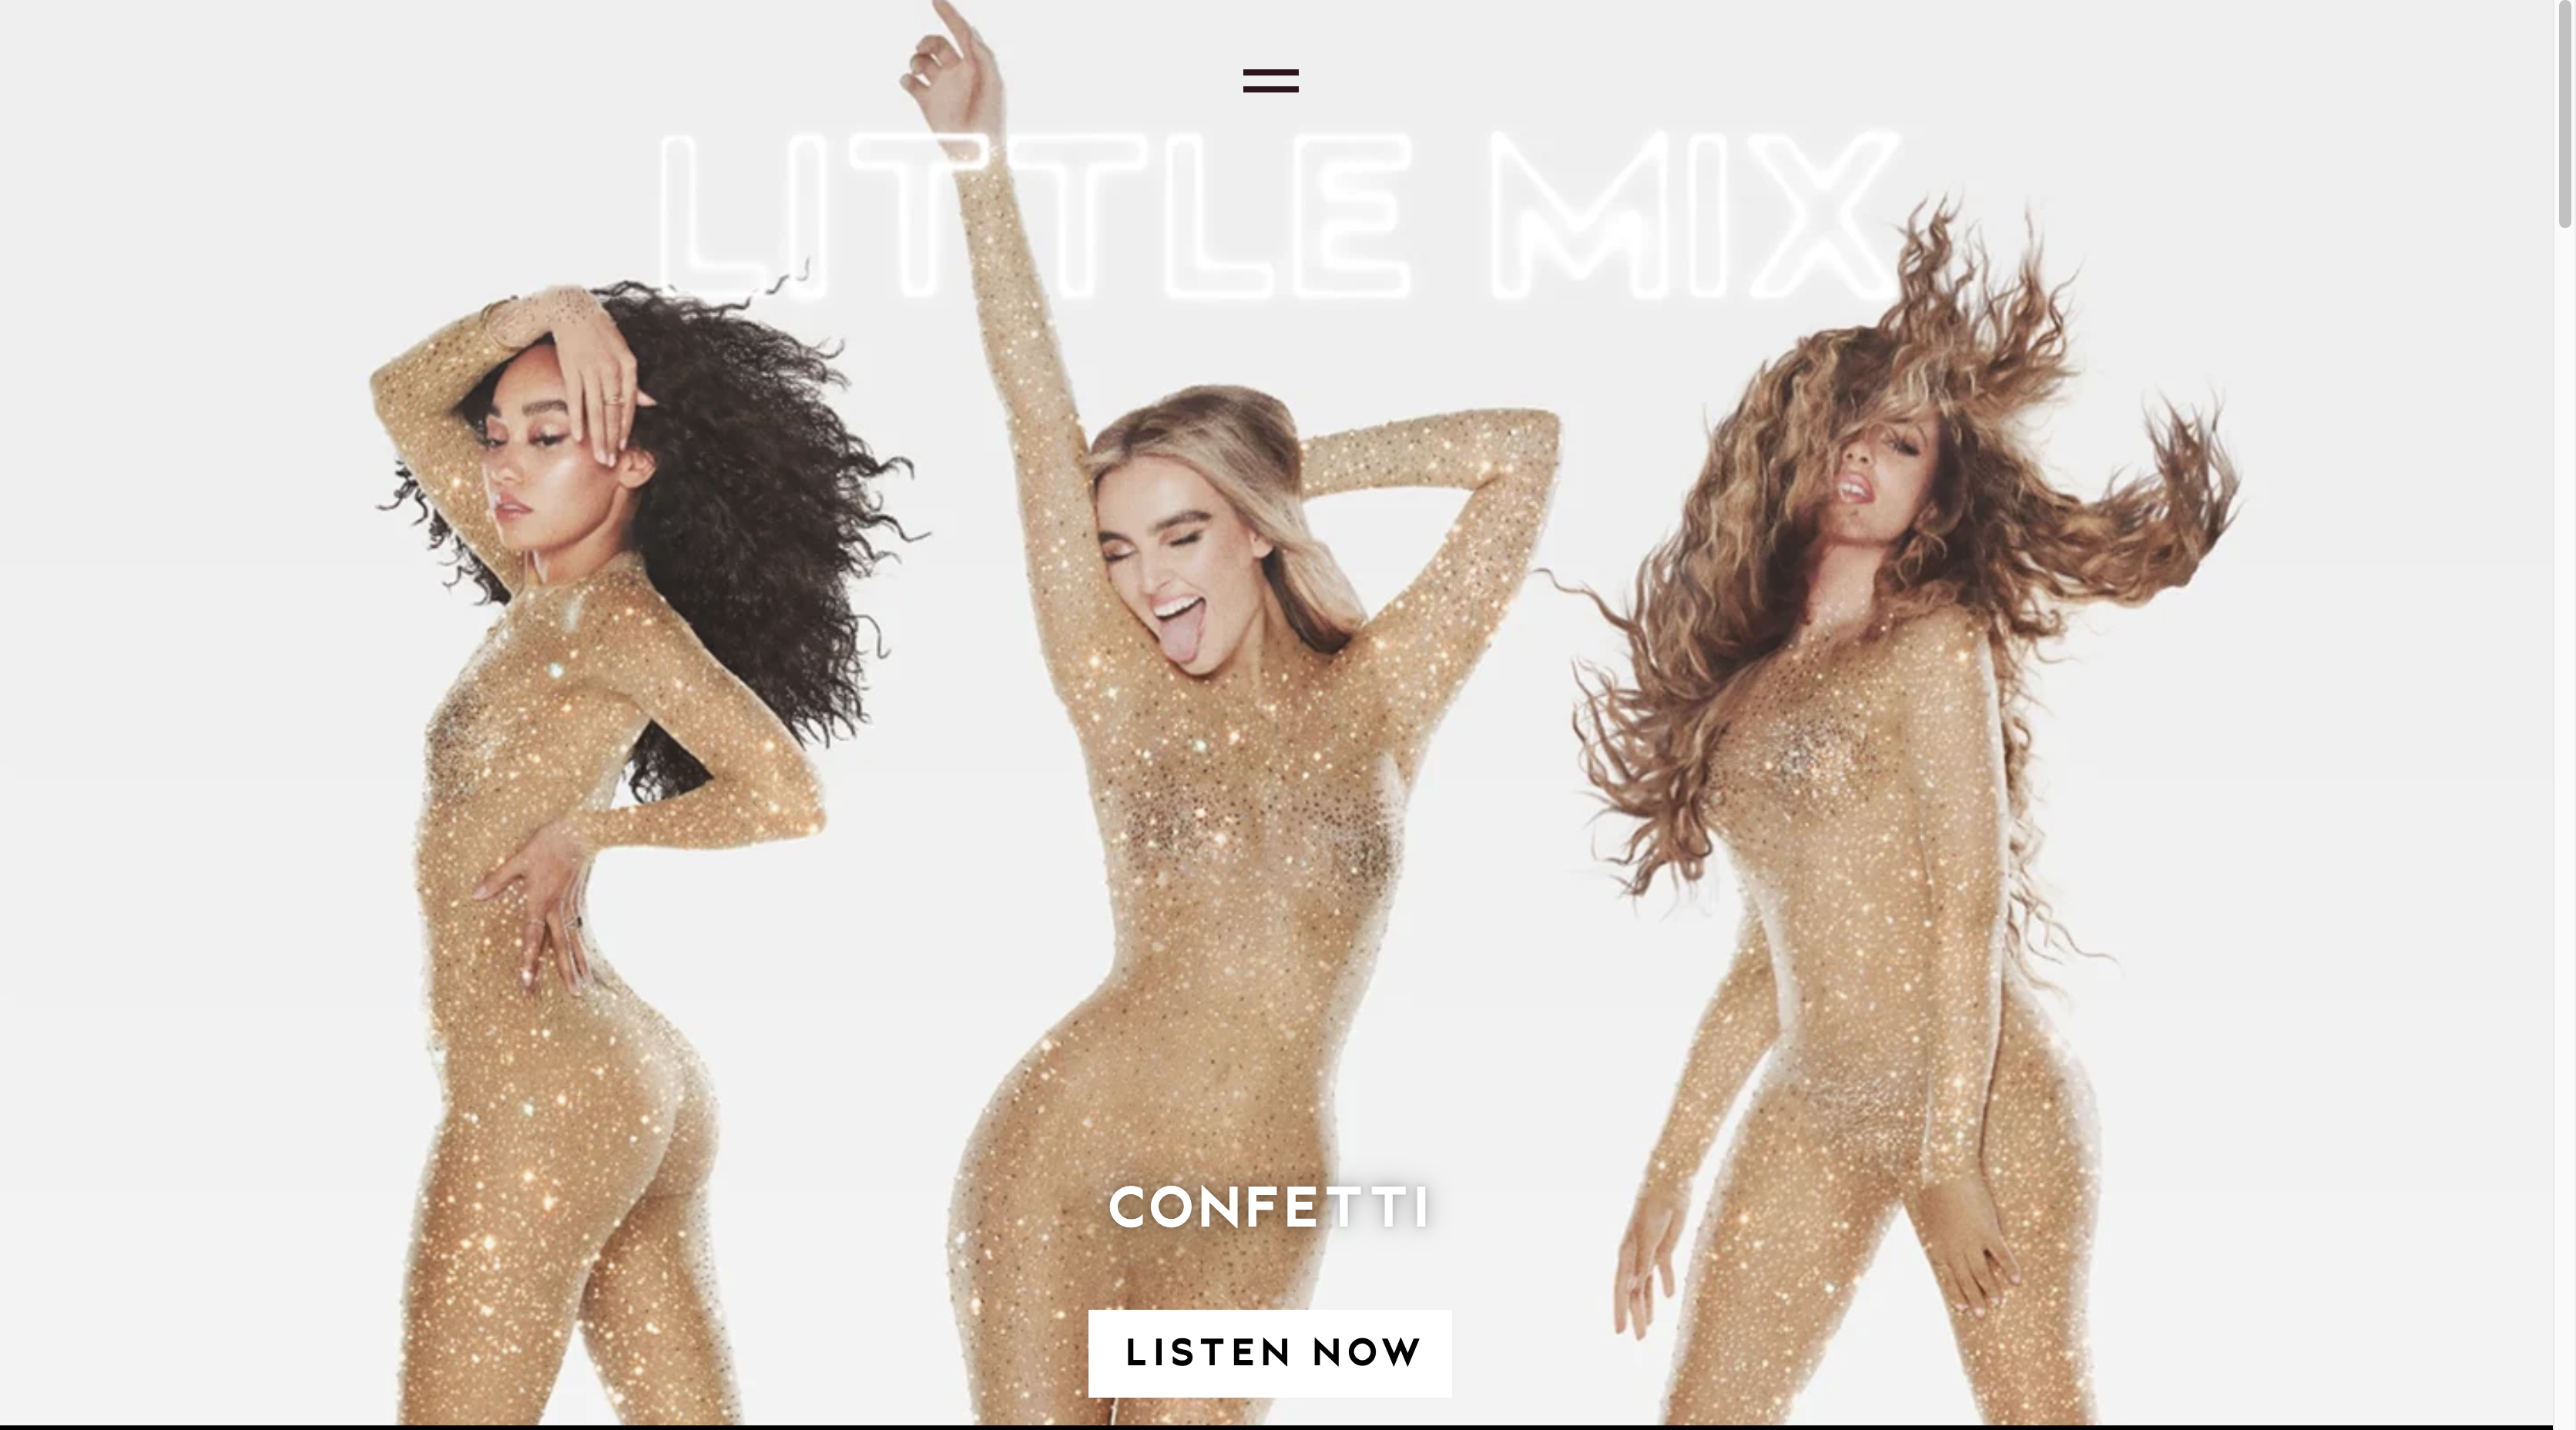 Images shows a screenshot of the little mix website